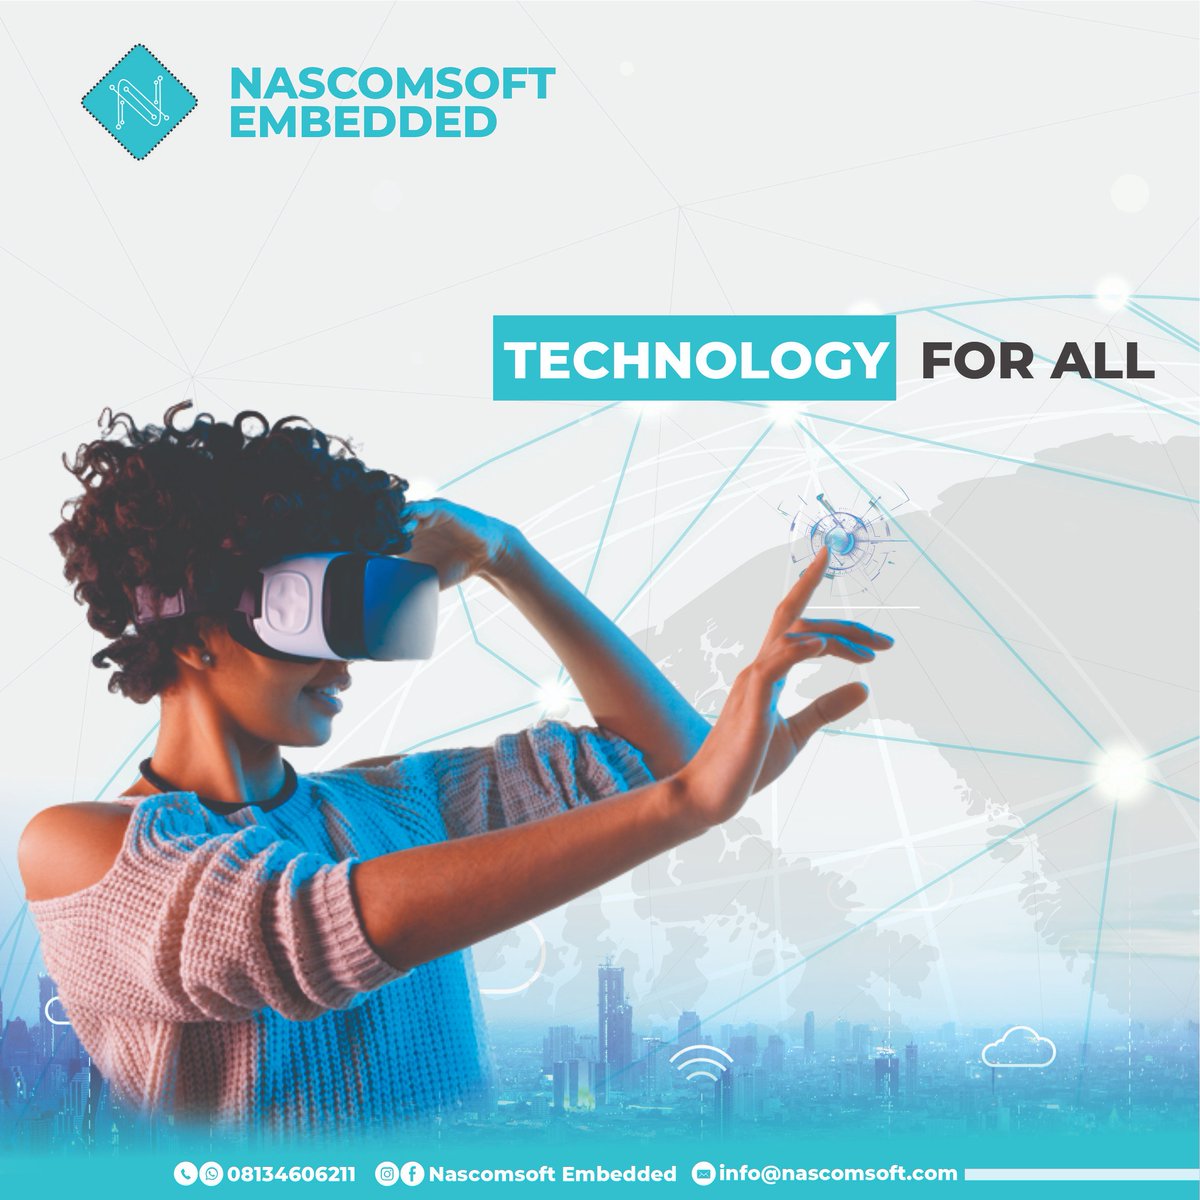 Unlock your tech potential with our latest courses! From programming to web dev to embedded systems, we have it all. Check out our flyers & enroll now for a successful tech career #programming #webdevelopment #embeddedsys #career #technologyforall #nascomsoftembedded